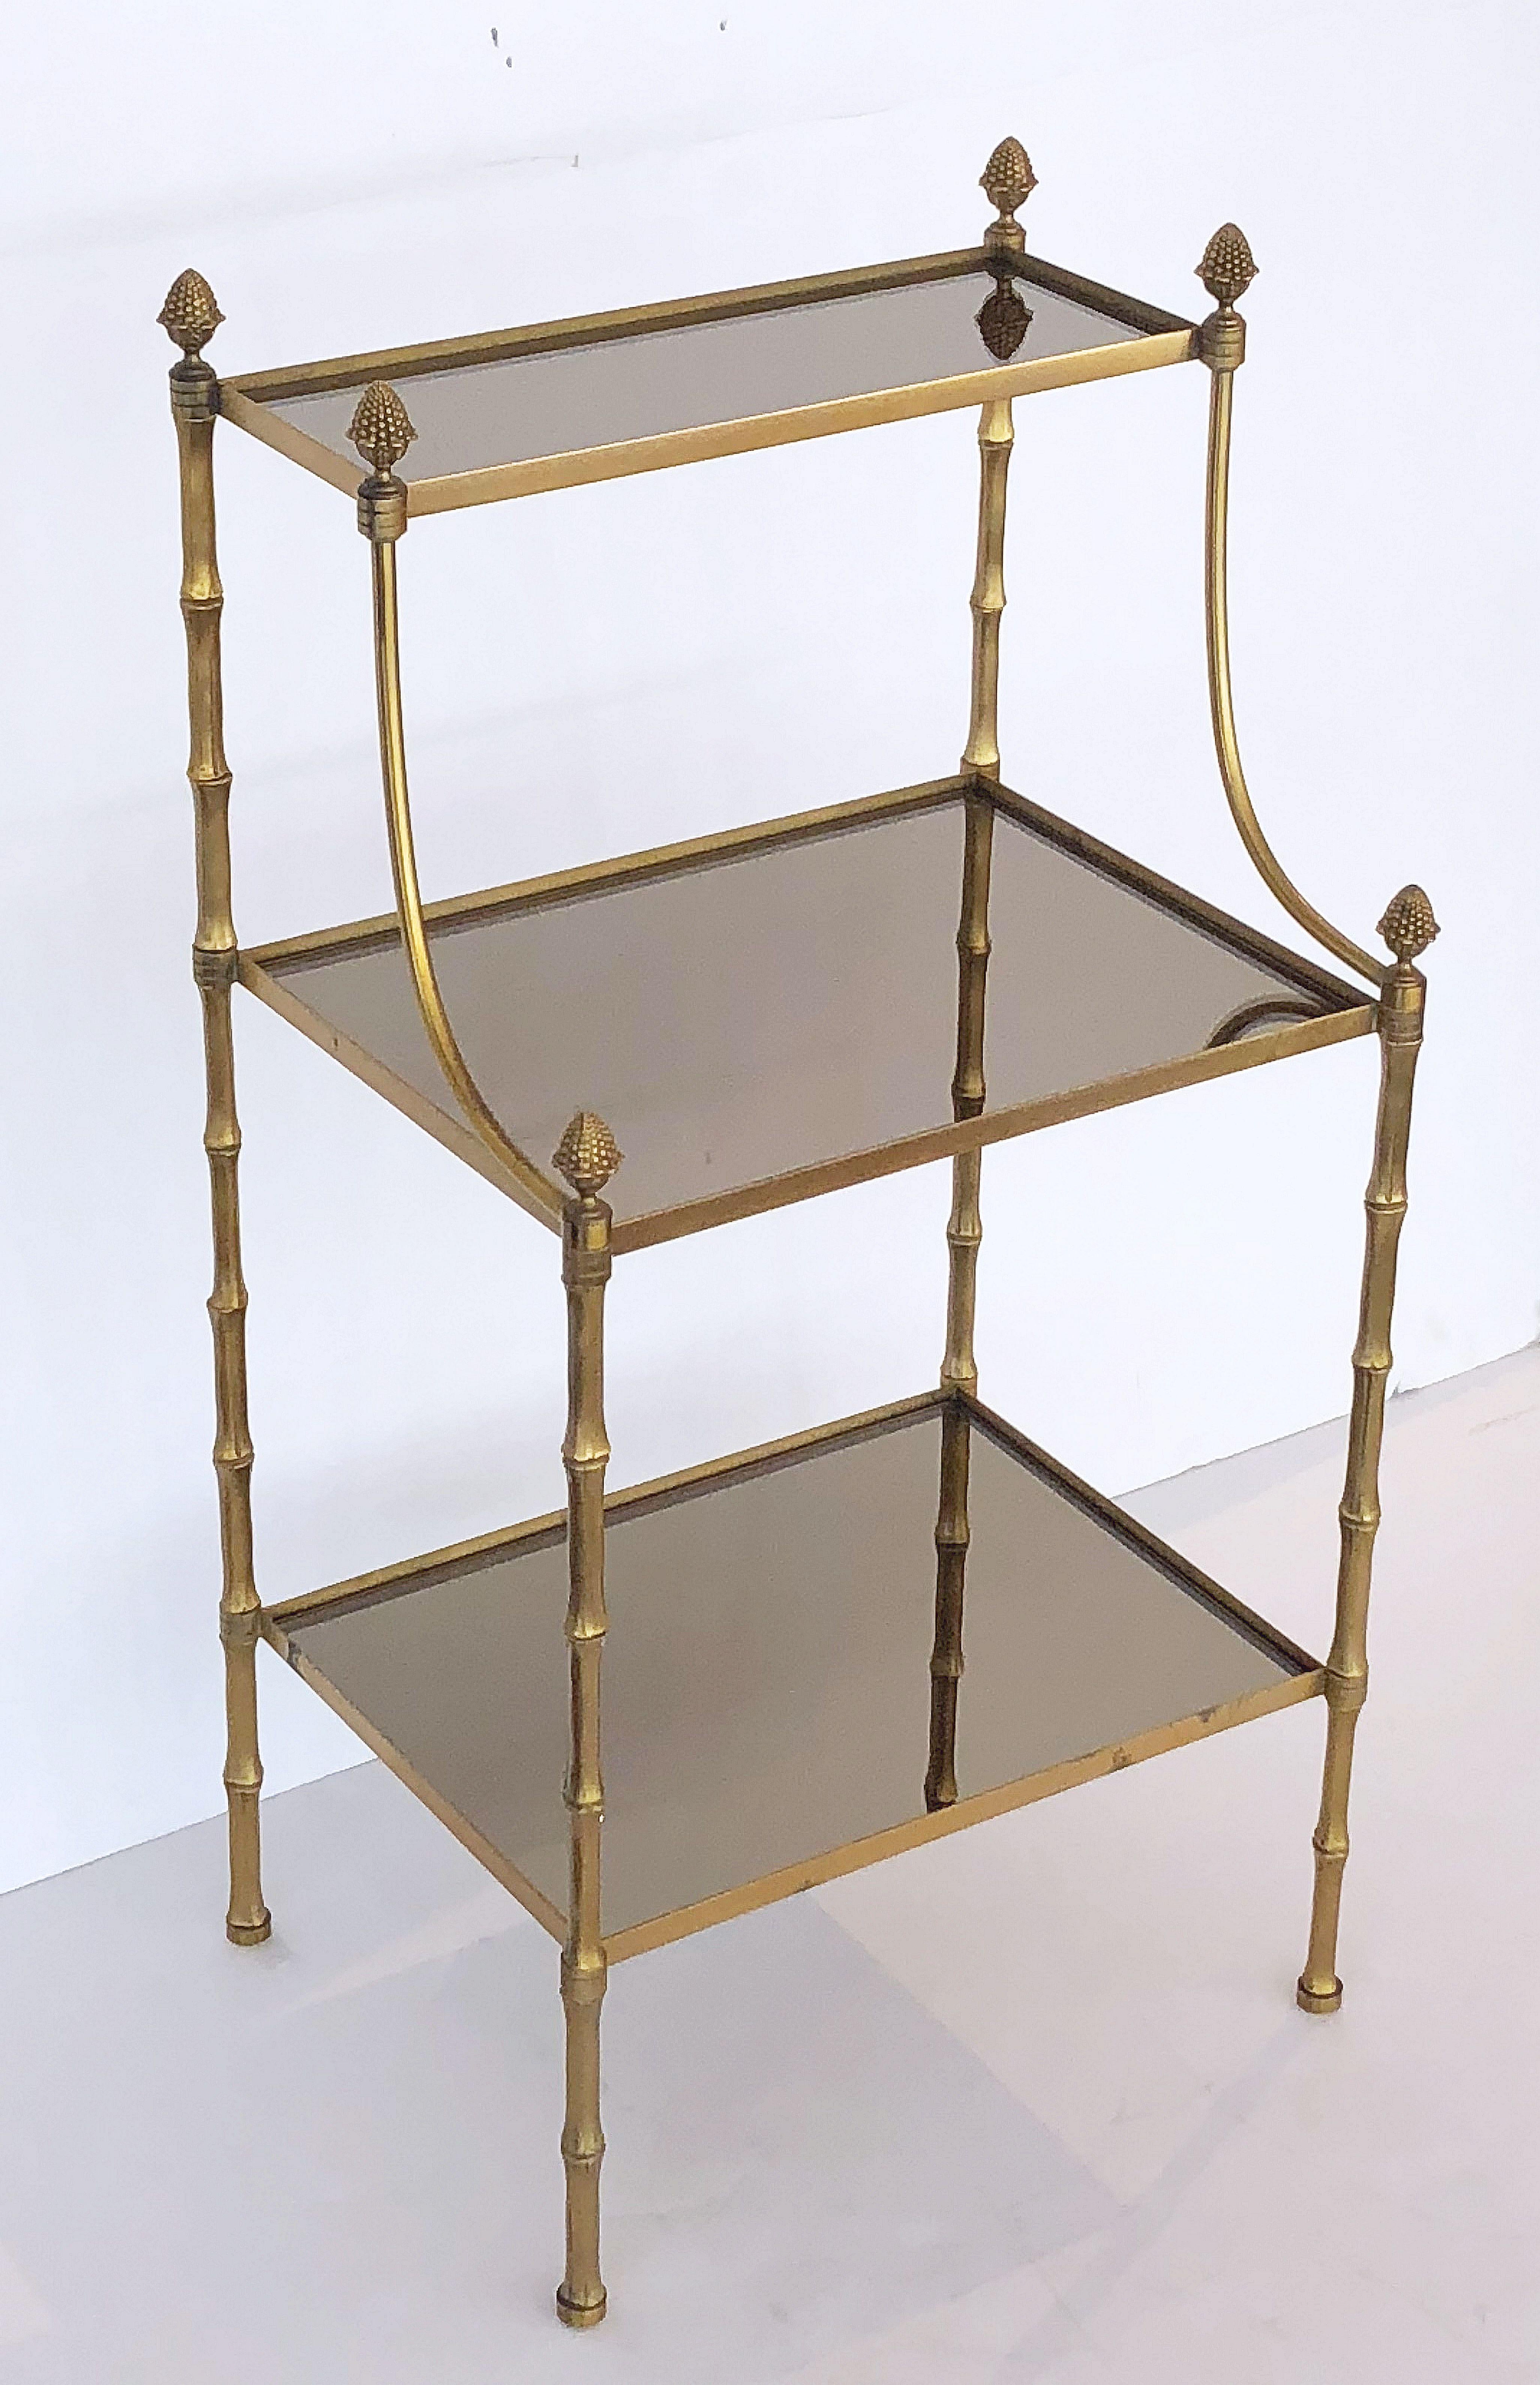 Metal French Mirrored Étagère or Shelves of Brass with Faux Bamboo Design